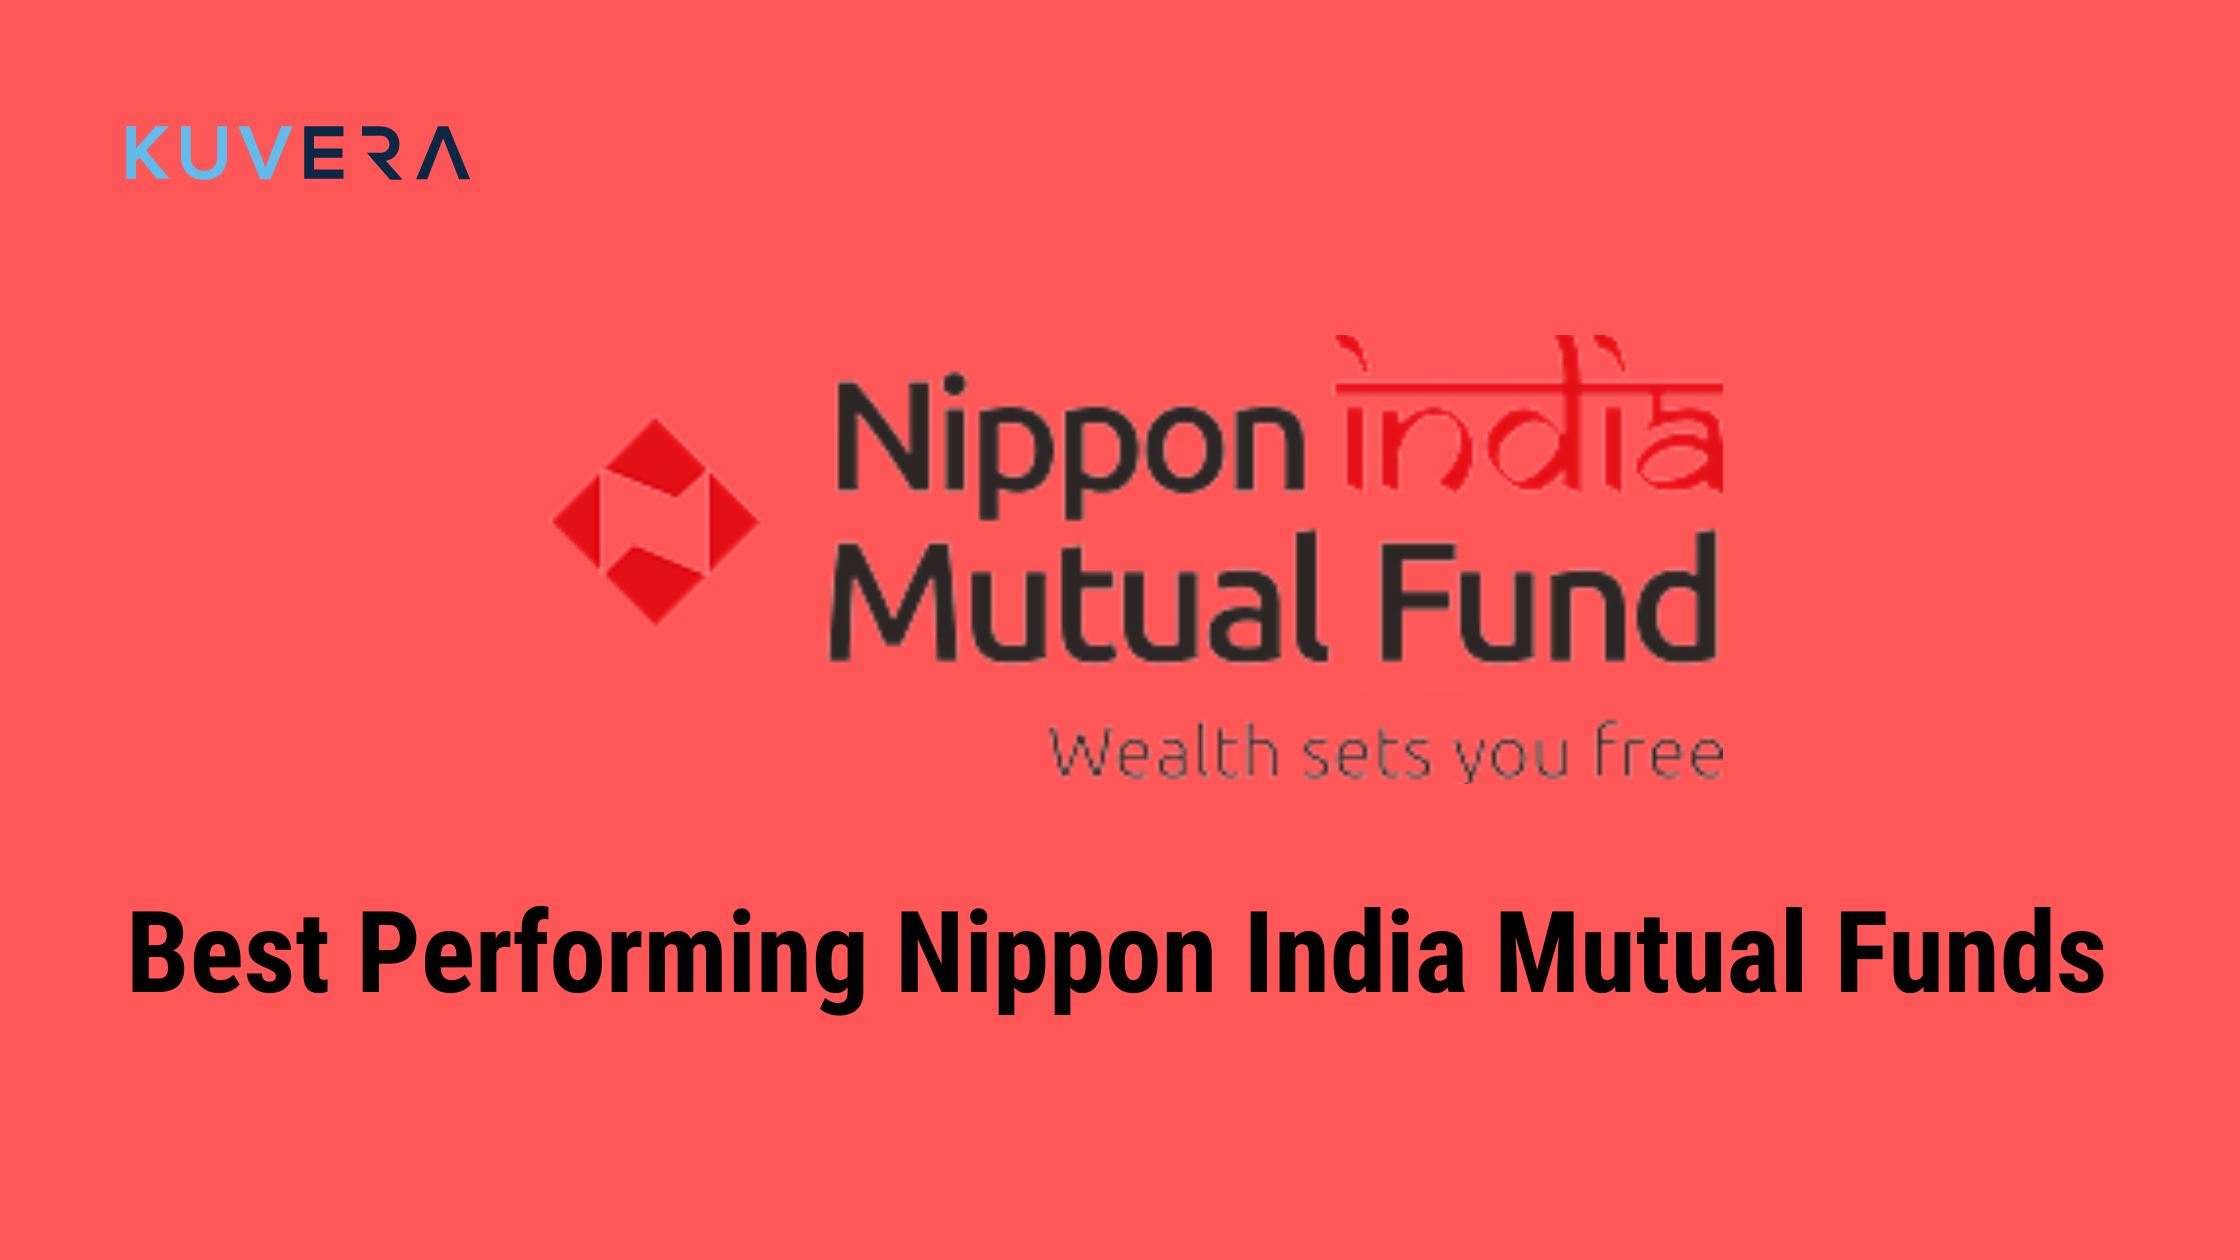 Best Performing Nippon India Mutual Funds Kuvera